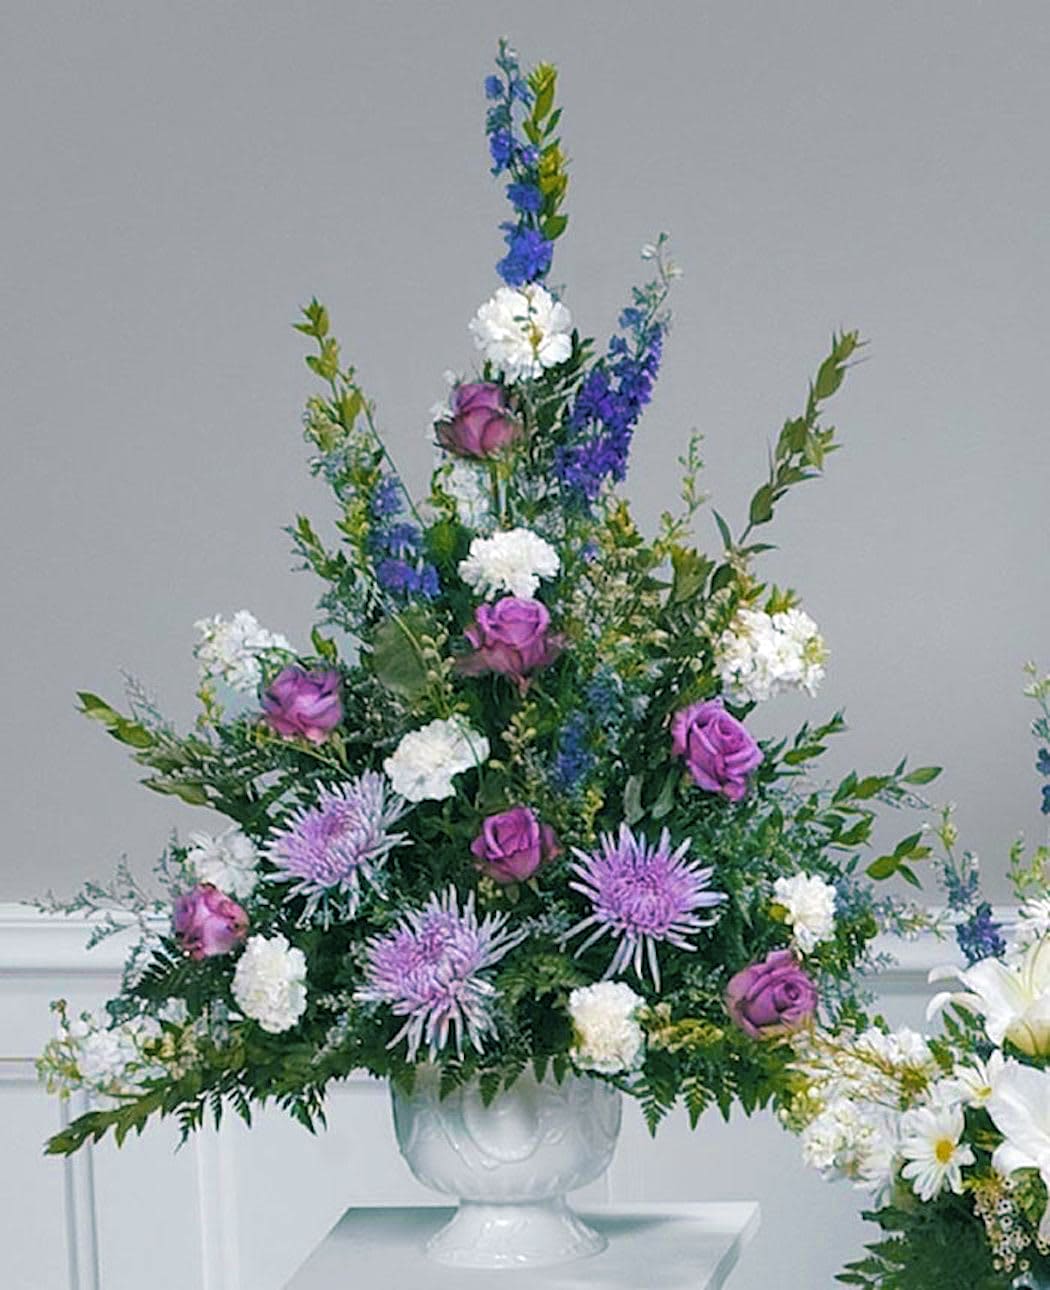 Lovely Lavender Pedestal Arrangement - Lovely lavender roses and spider mums with purple larkspur and white carnations create a beautiful peace appropriate for anyone. 